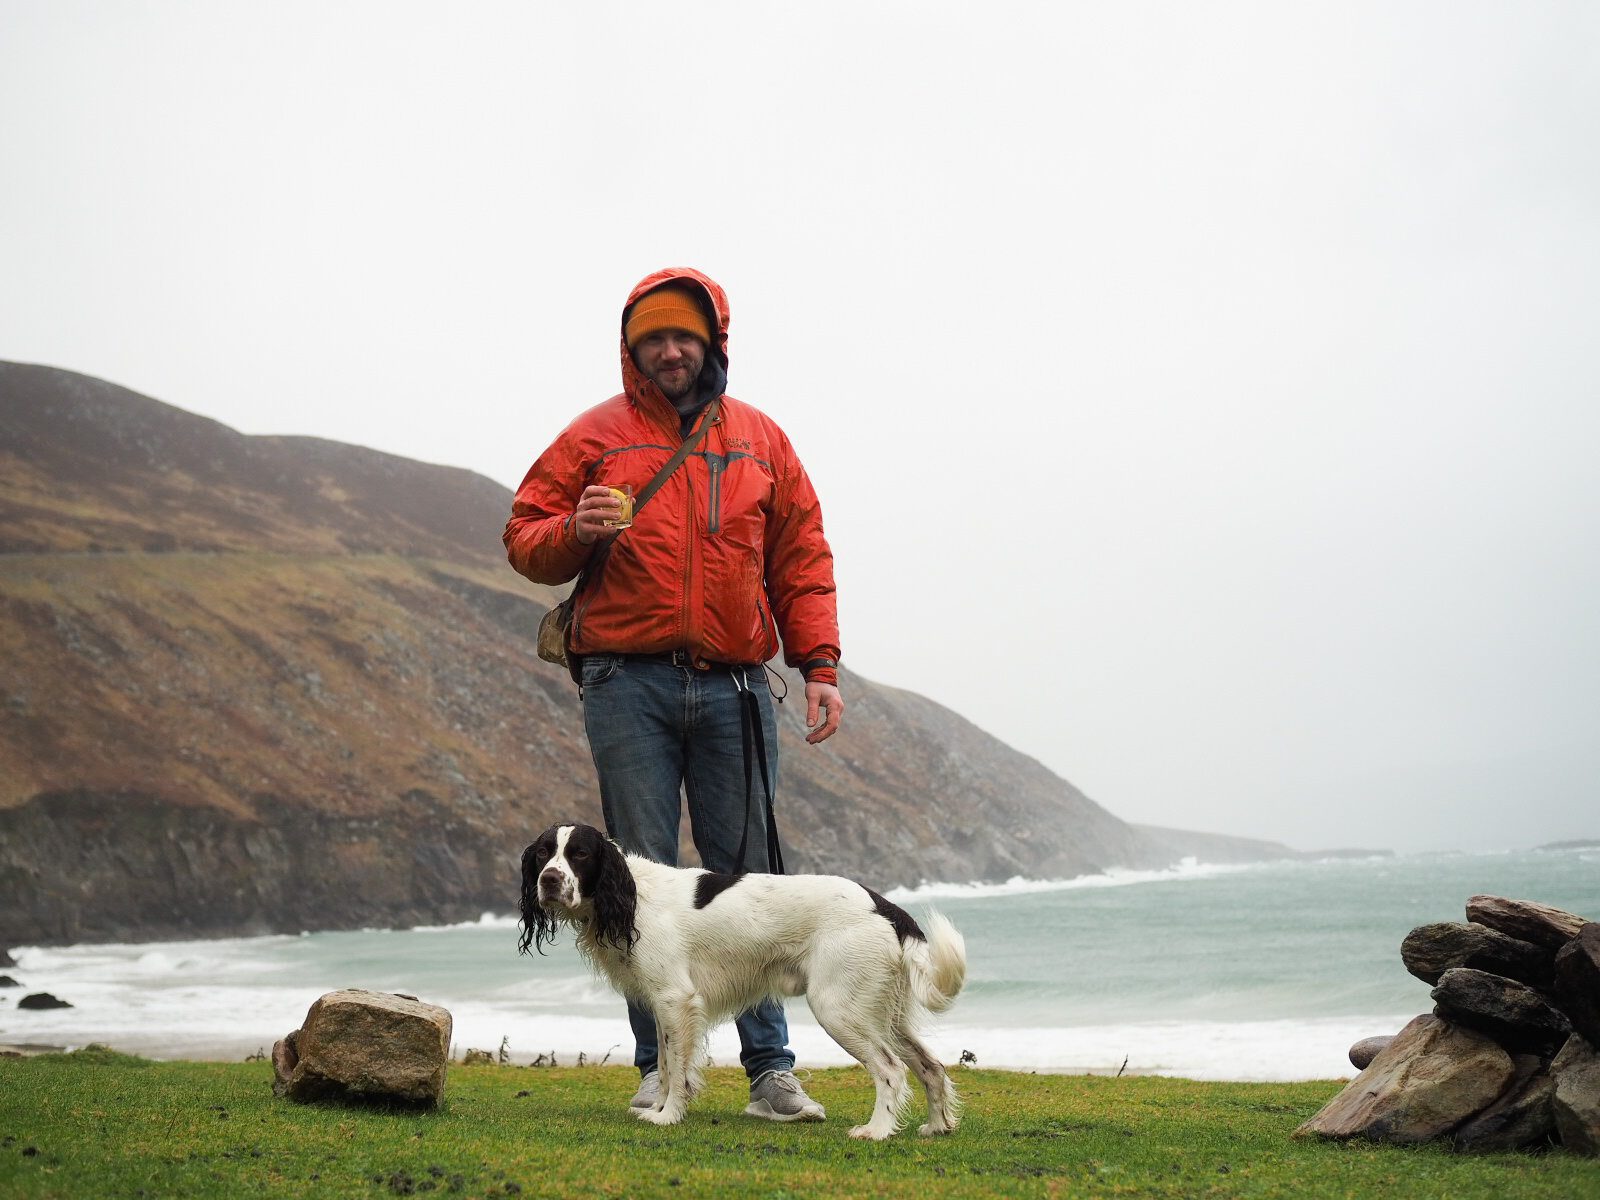 Wild Achill Island The Bearded Candle Makers MIchael Morris and Dog